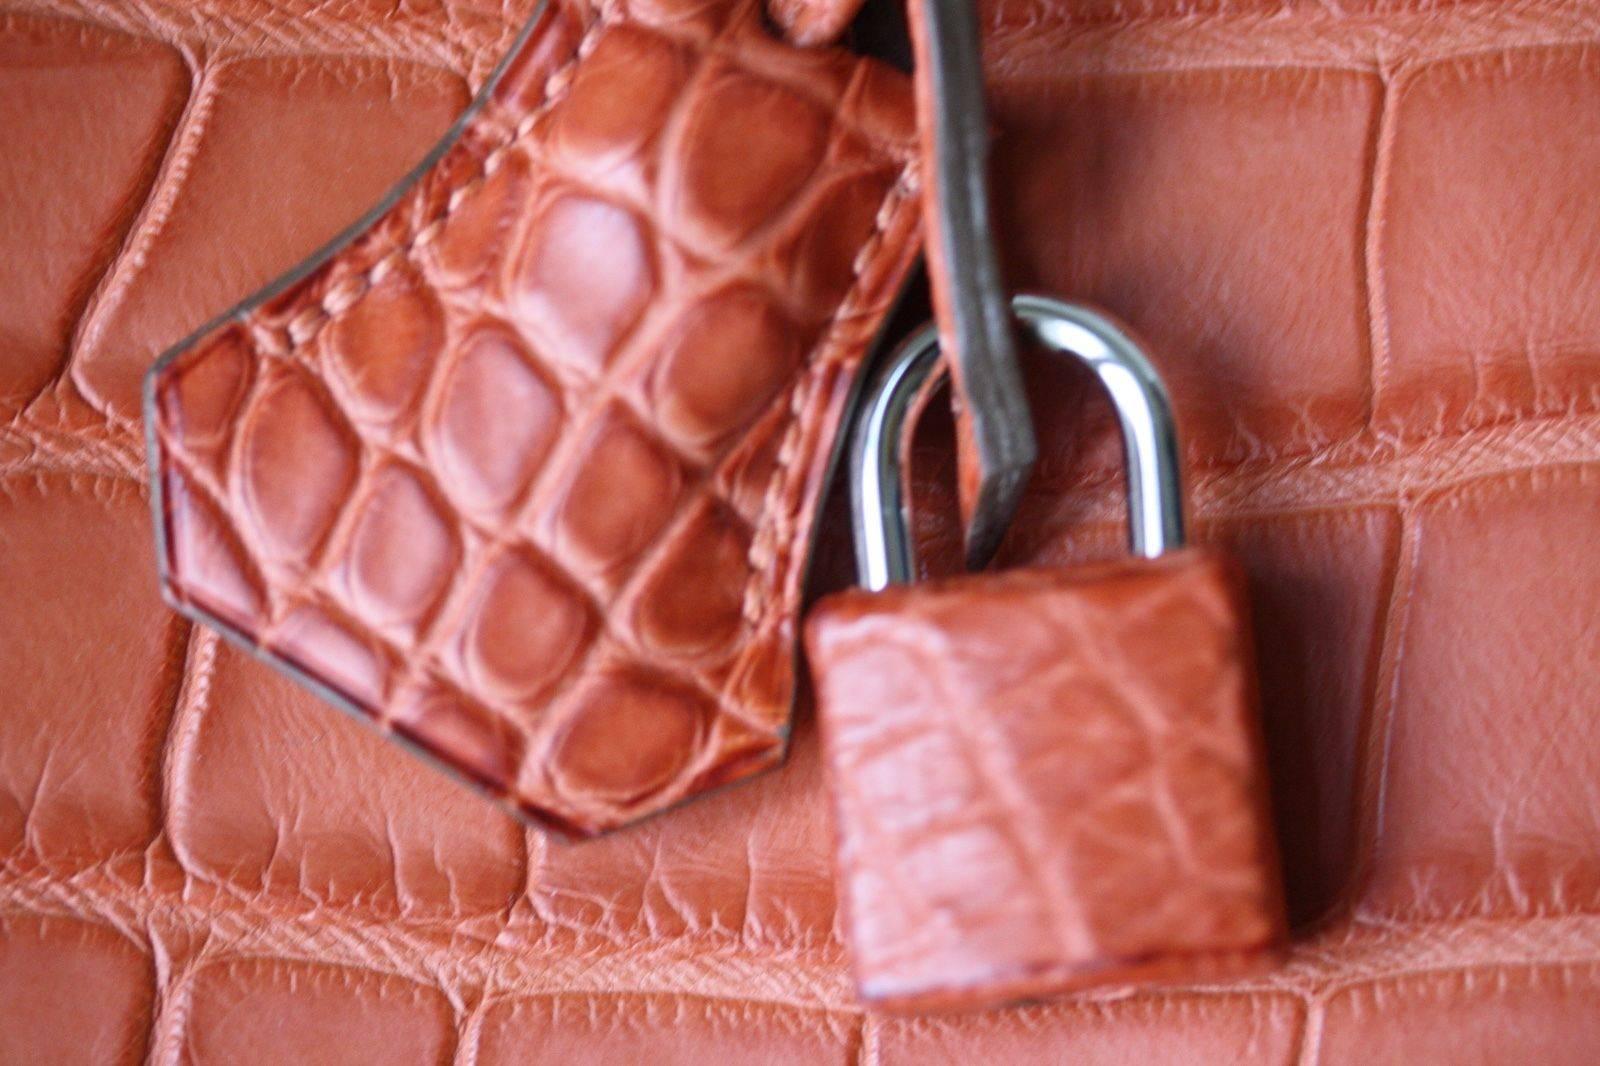 Hermès 40cm Birkin in beautiful Matte Alligator with palladium hardware. Luxuriously rich Hermès orange colour with tonal top stitching.

Year: Date stamp is a O in a square - 2011 production.

Condition: This bag has only been used lightly, there